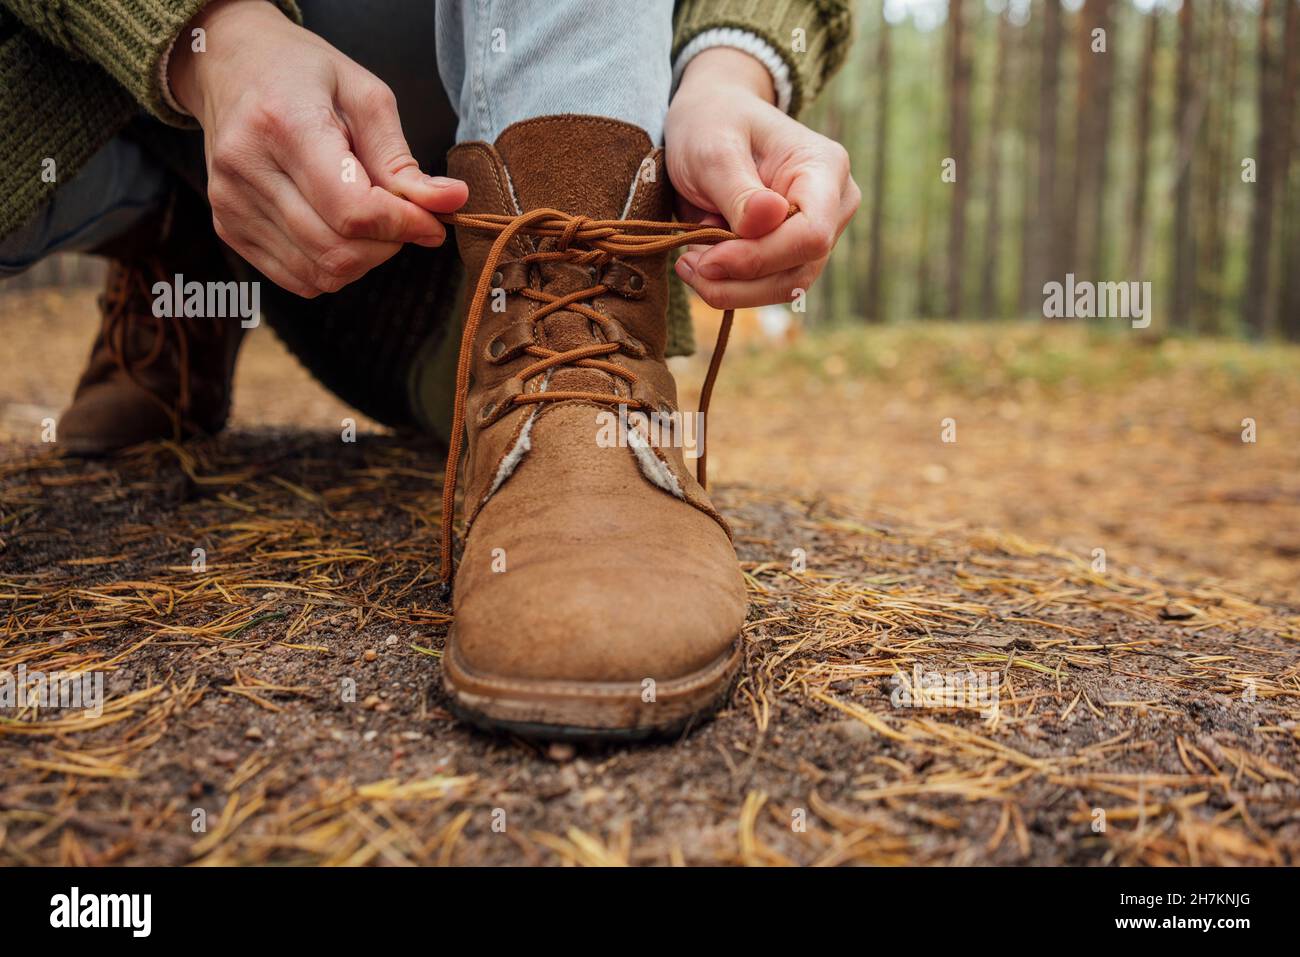 Woman tying shoelace of boot in forest Stock Photo